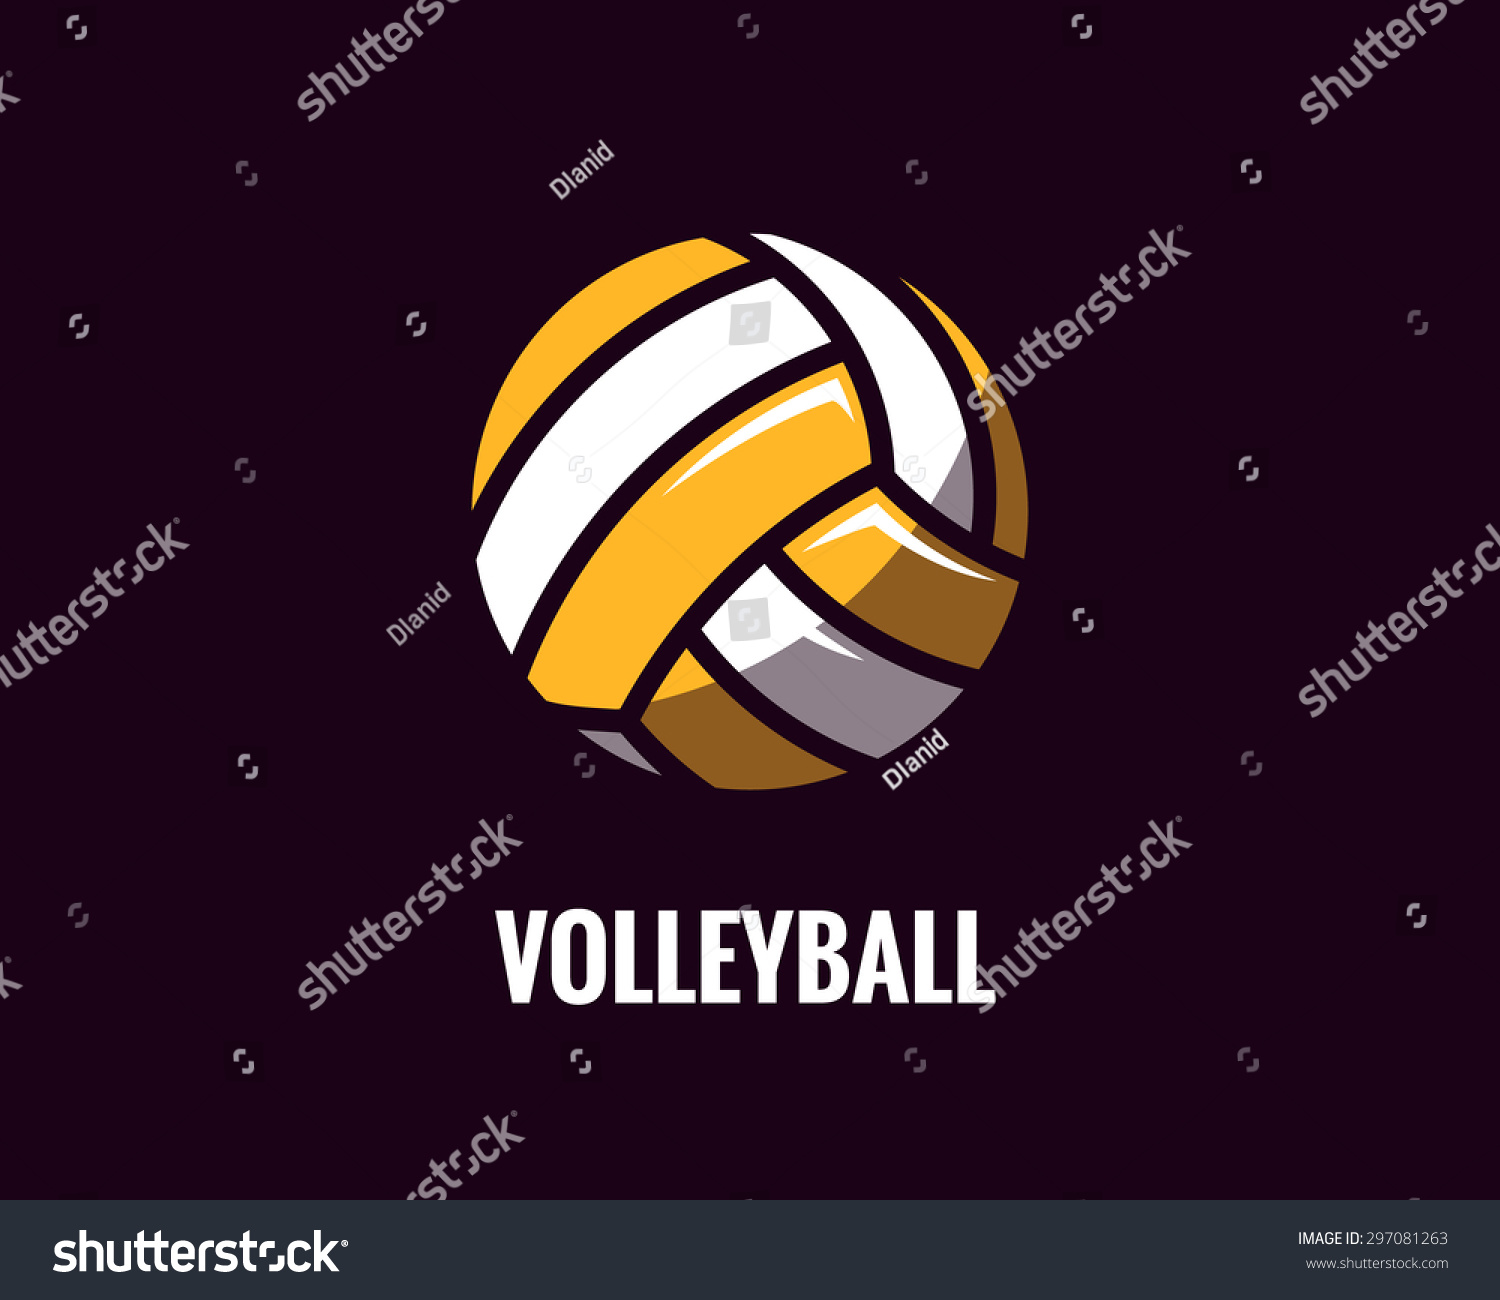 Colorful Volleyball Ball Icon. Vector Illustration. - 297081263 ...